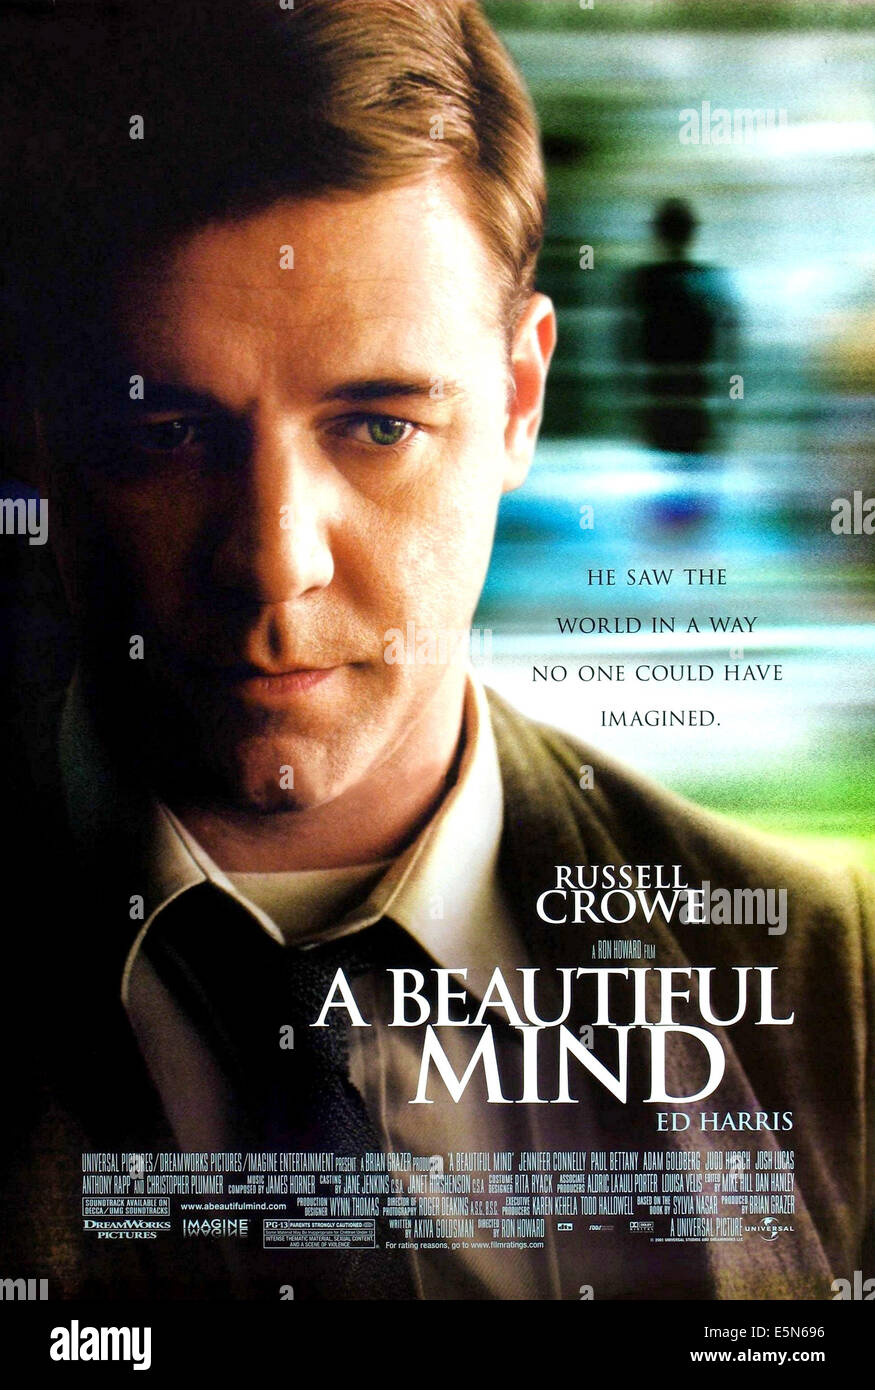 A BEAUTIFUL MIND, Russell Crowe, 2001 Stock Photo